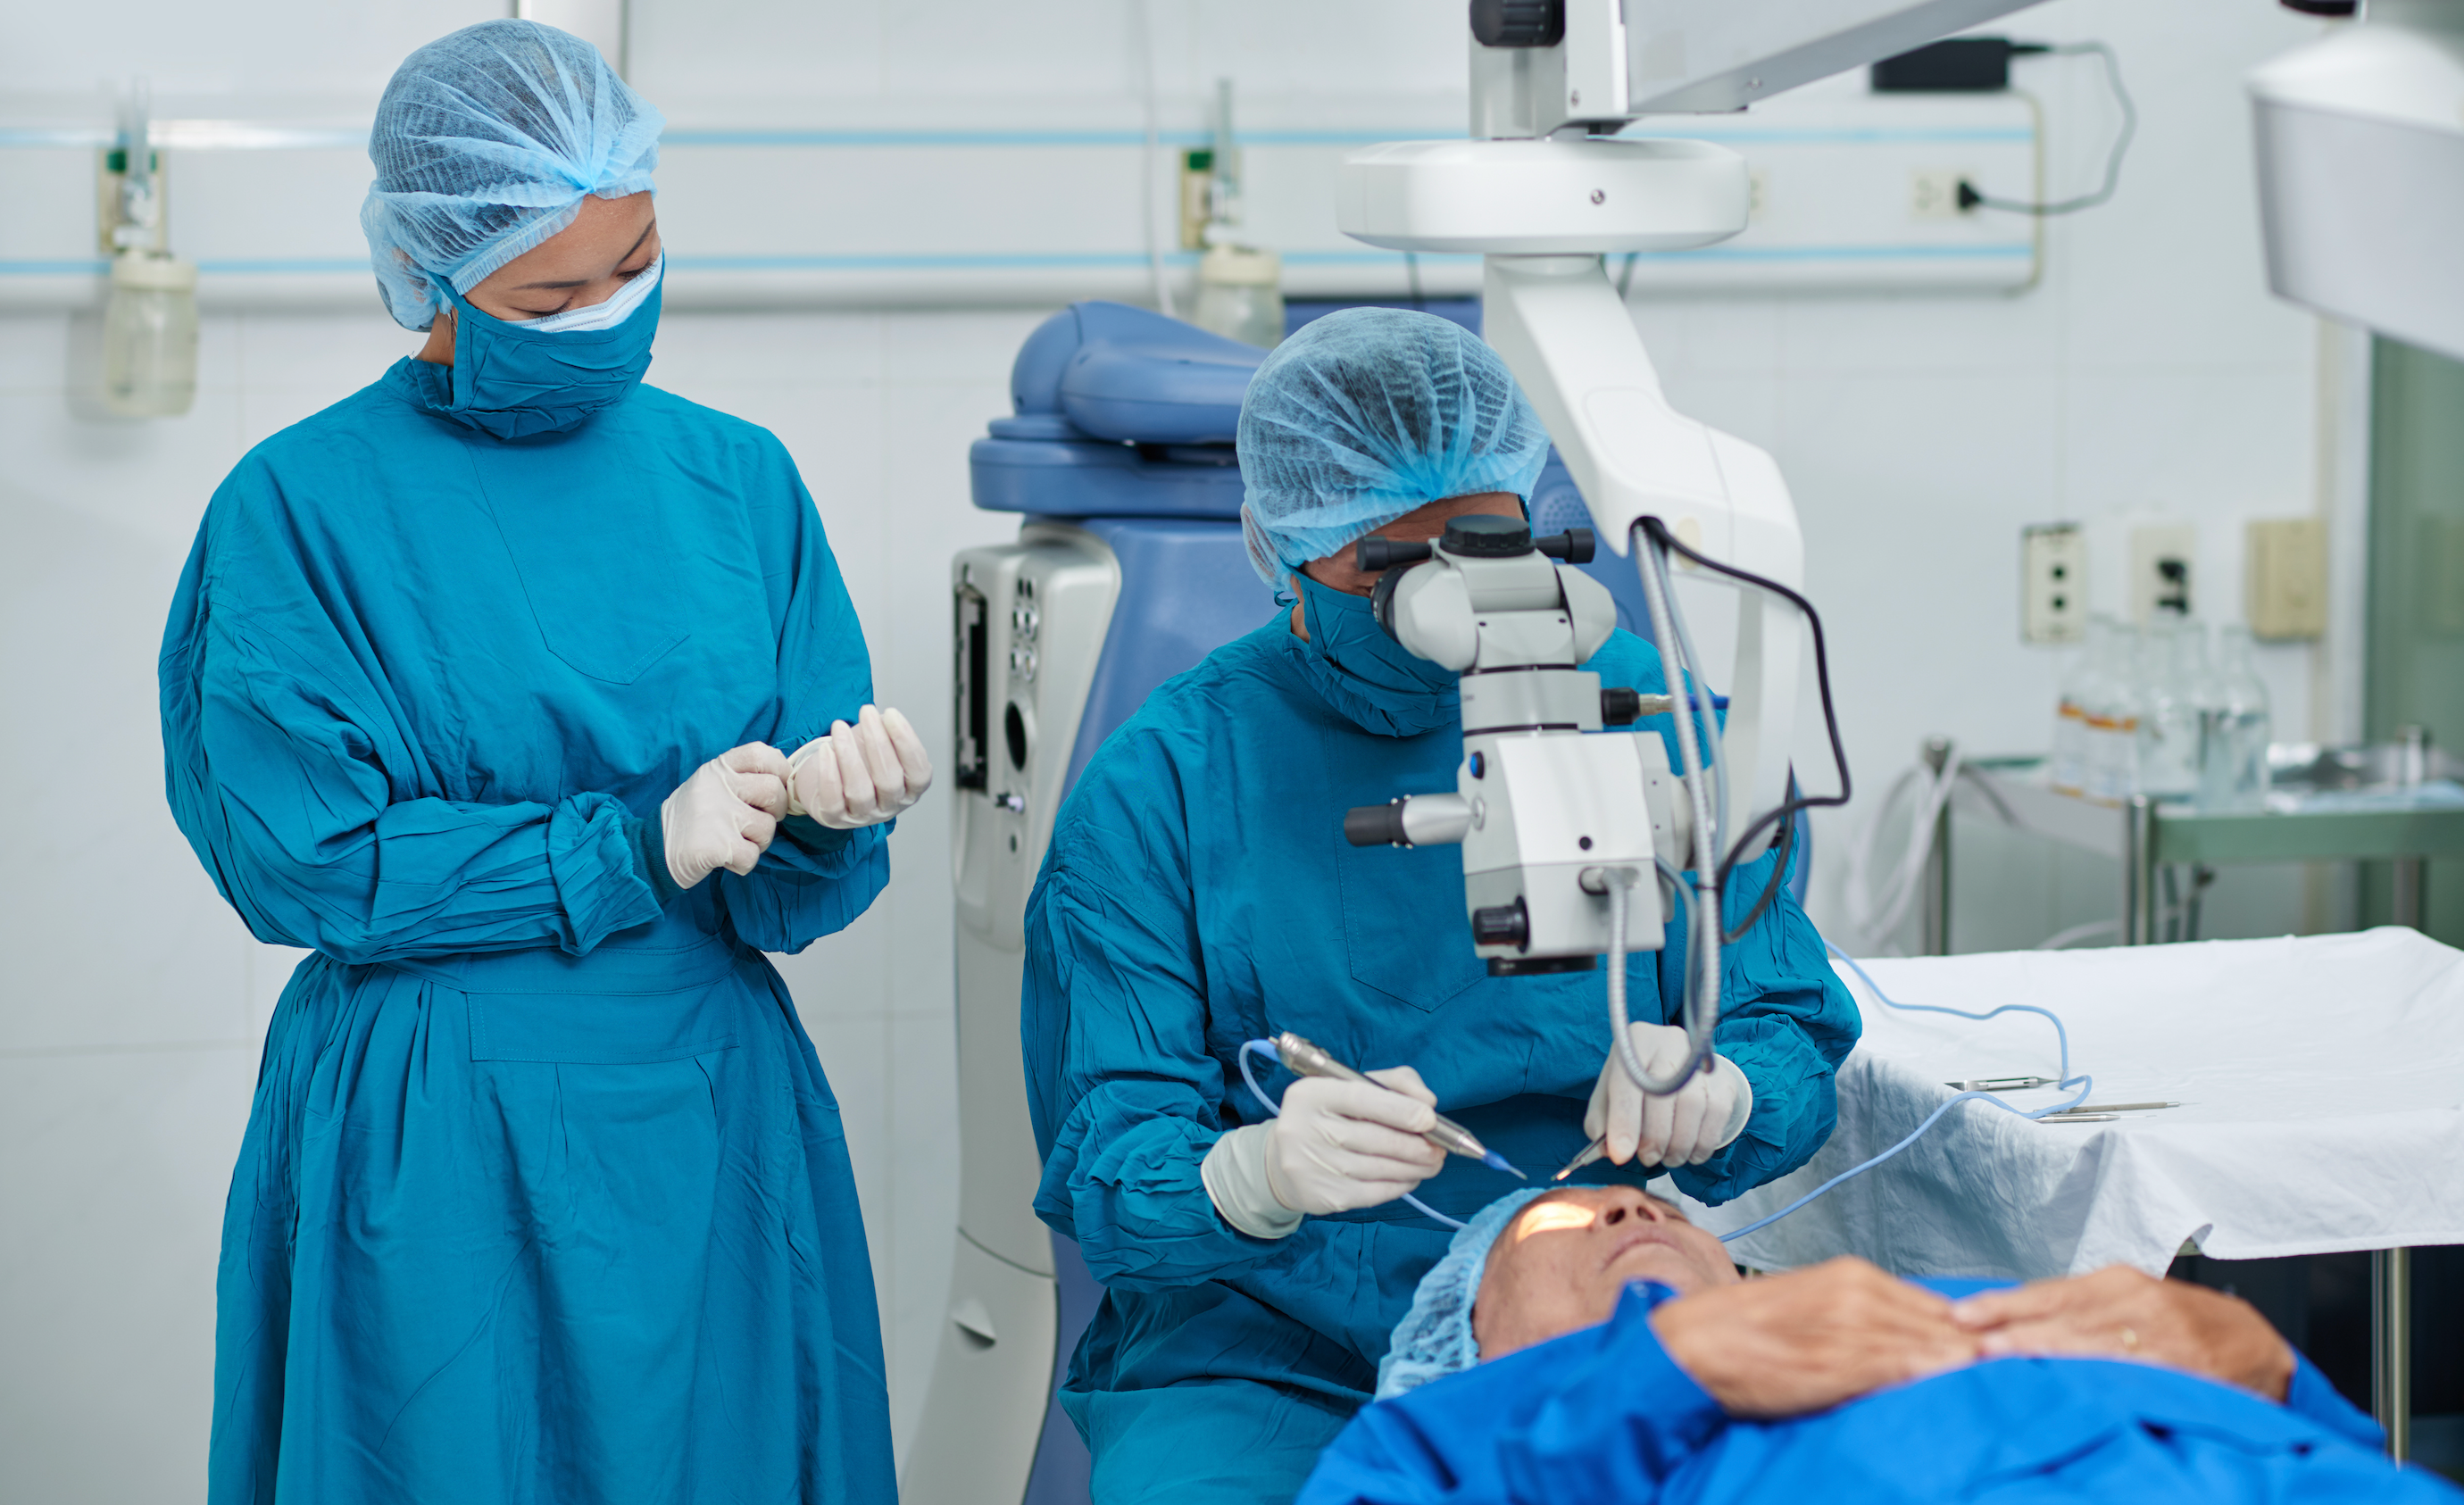 Complex cataract surgery requires more time and resources than simple cataract surgery, and this study indicates that the incremental reimbursement for the complex surgery is not enough to offset the increased costs. (Image courtesy of Adobe Stock/Dragon Images)